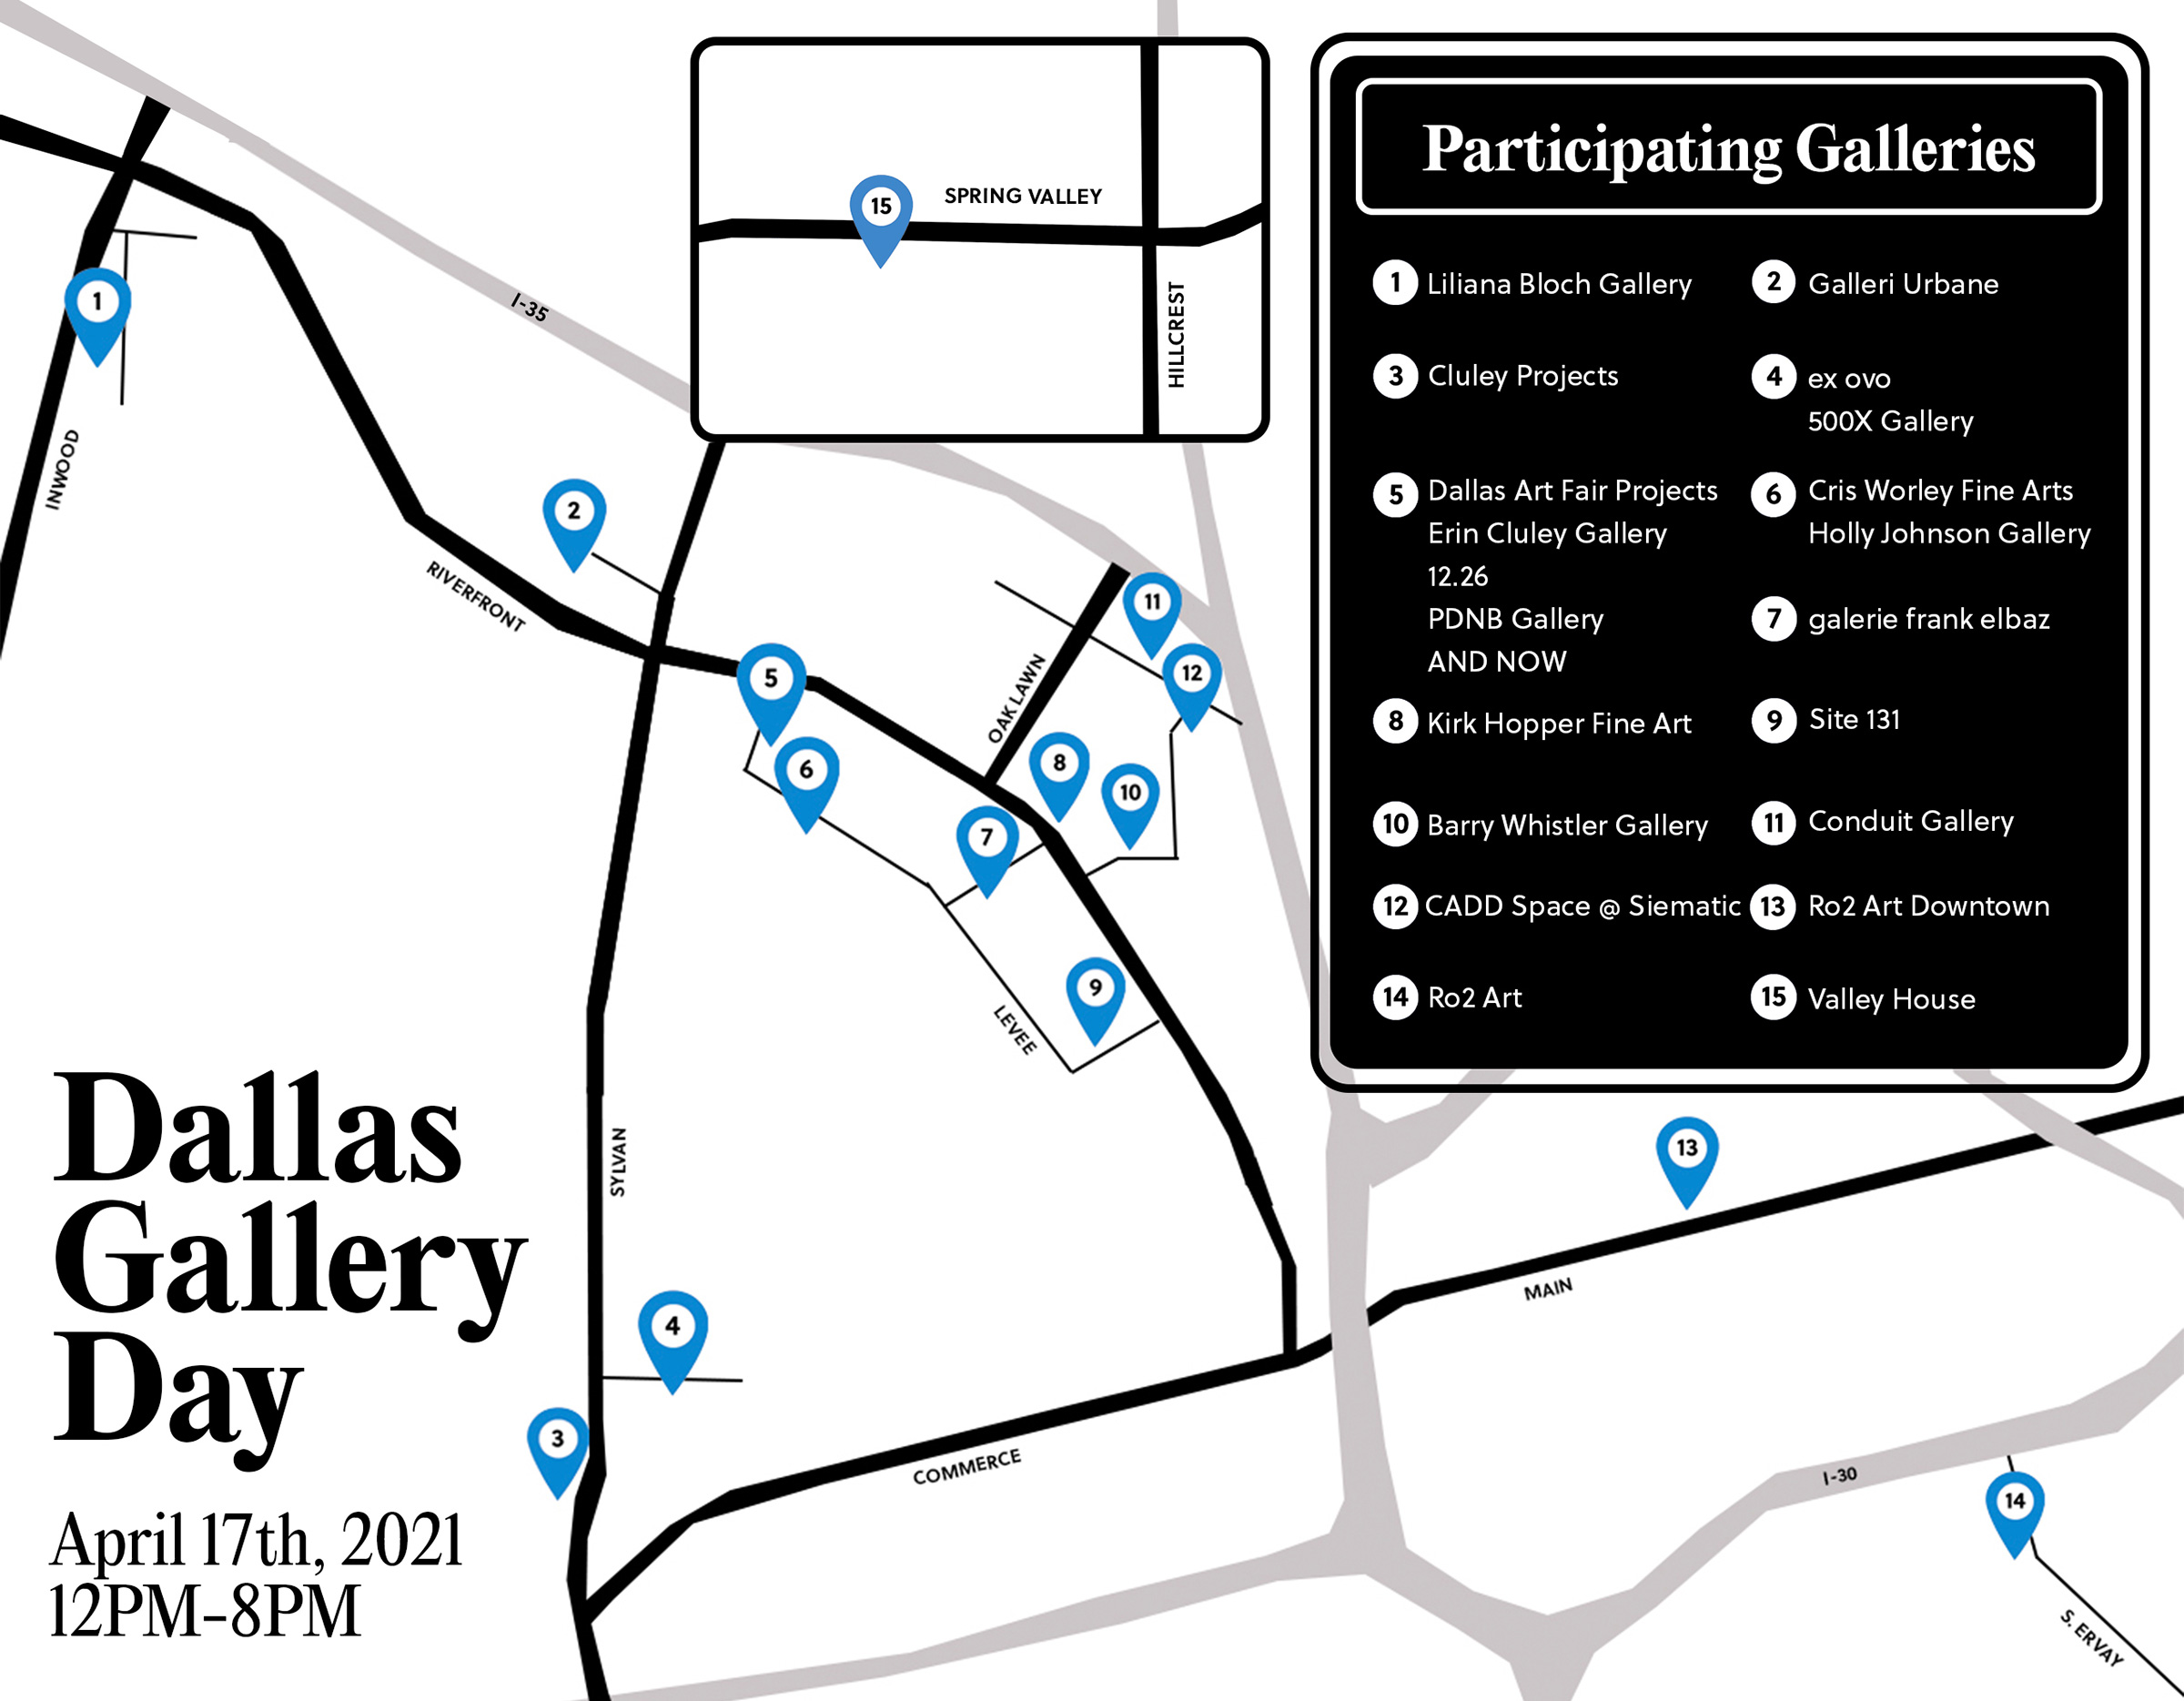 Gallery Map